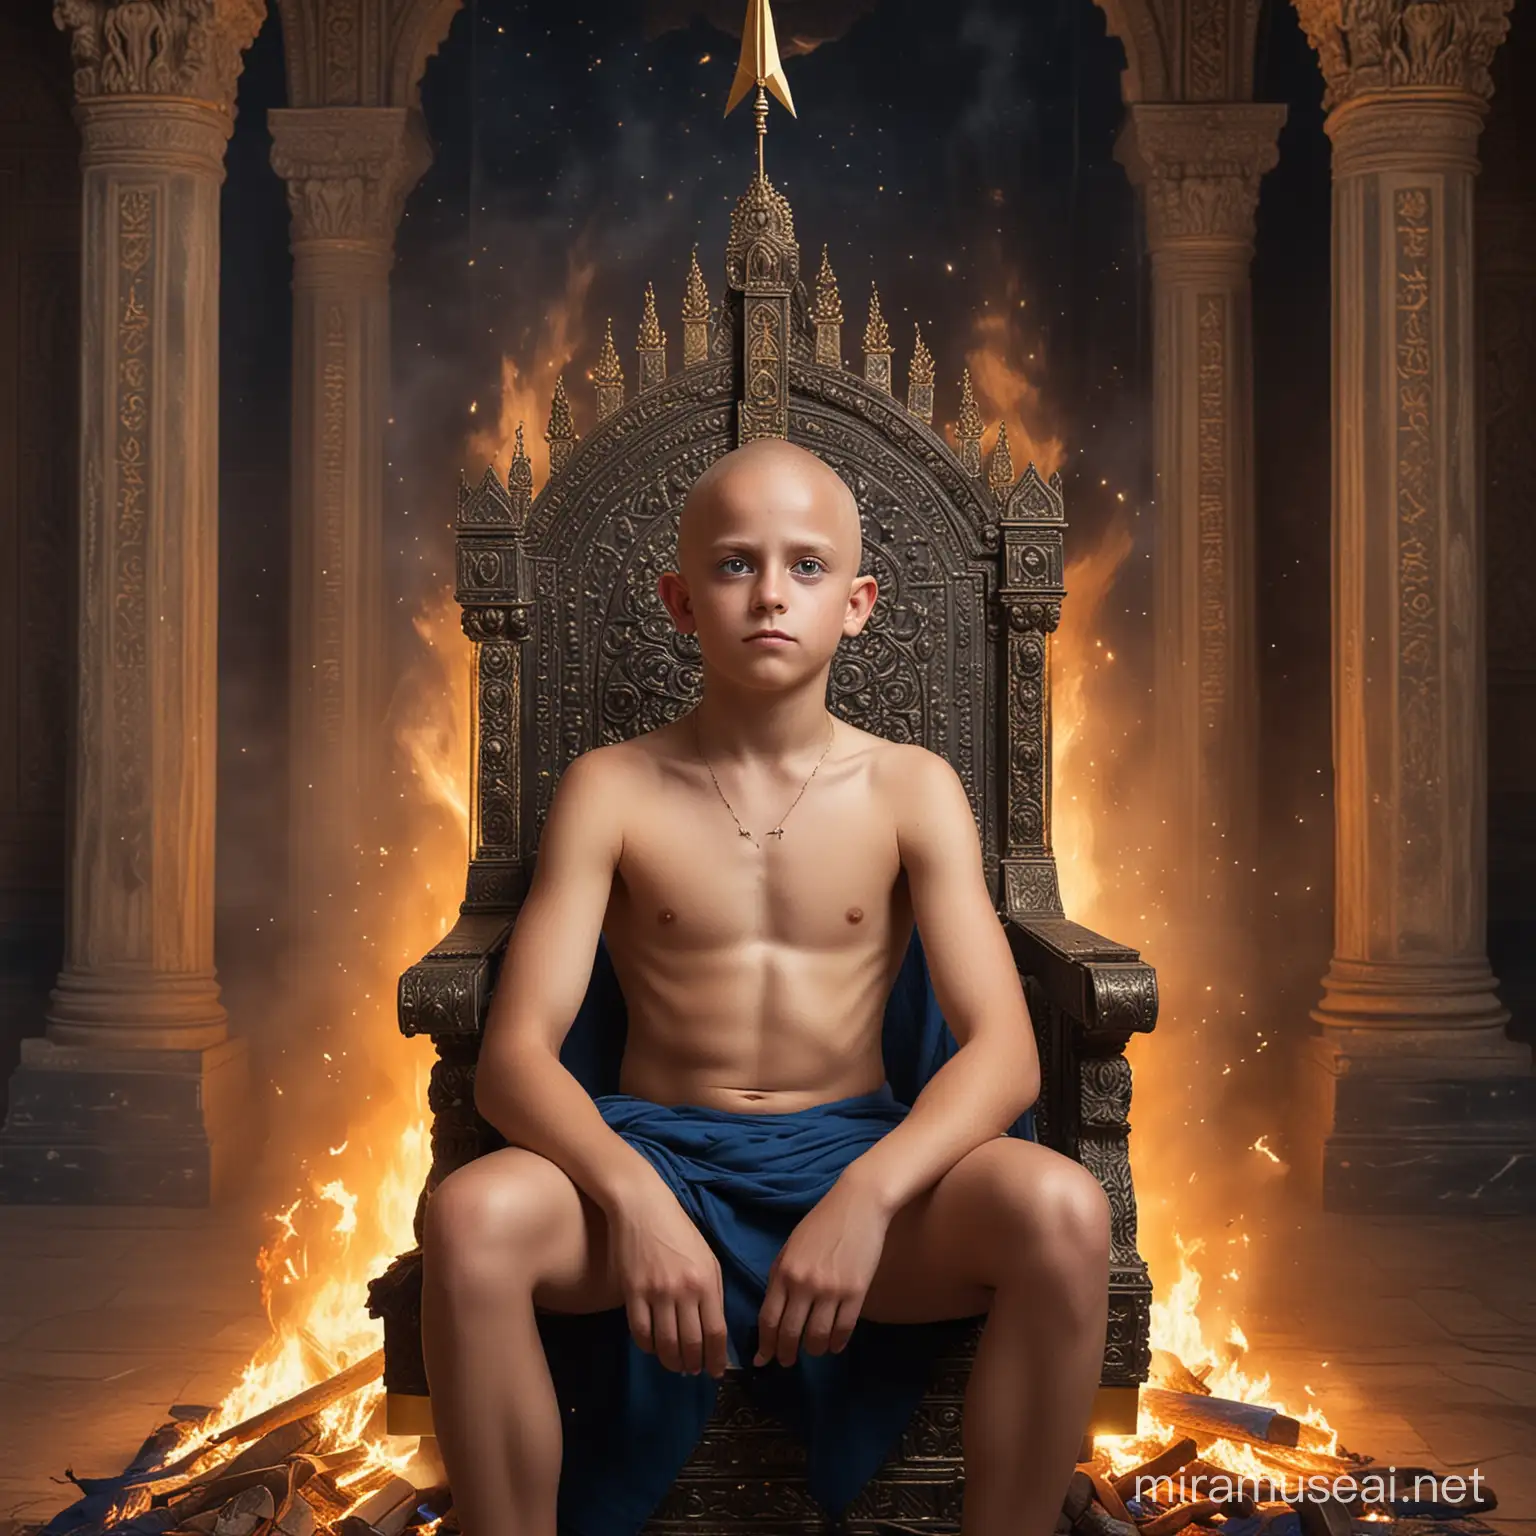 Majestic Young Boy on Fiery Throne in Hindu Palace